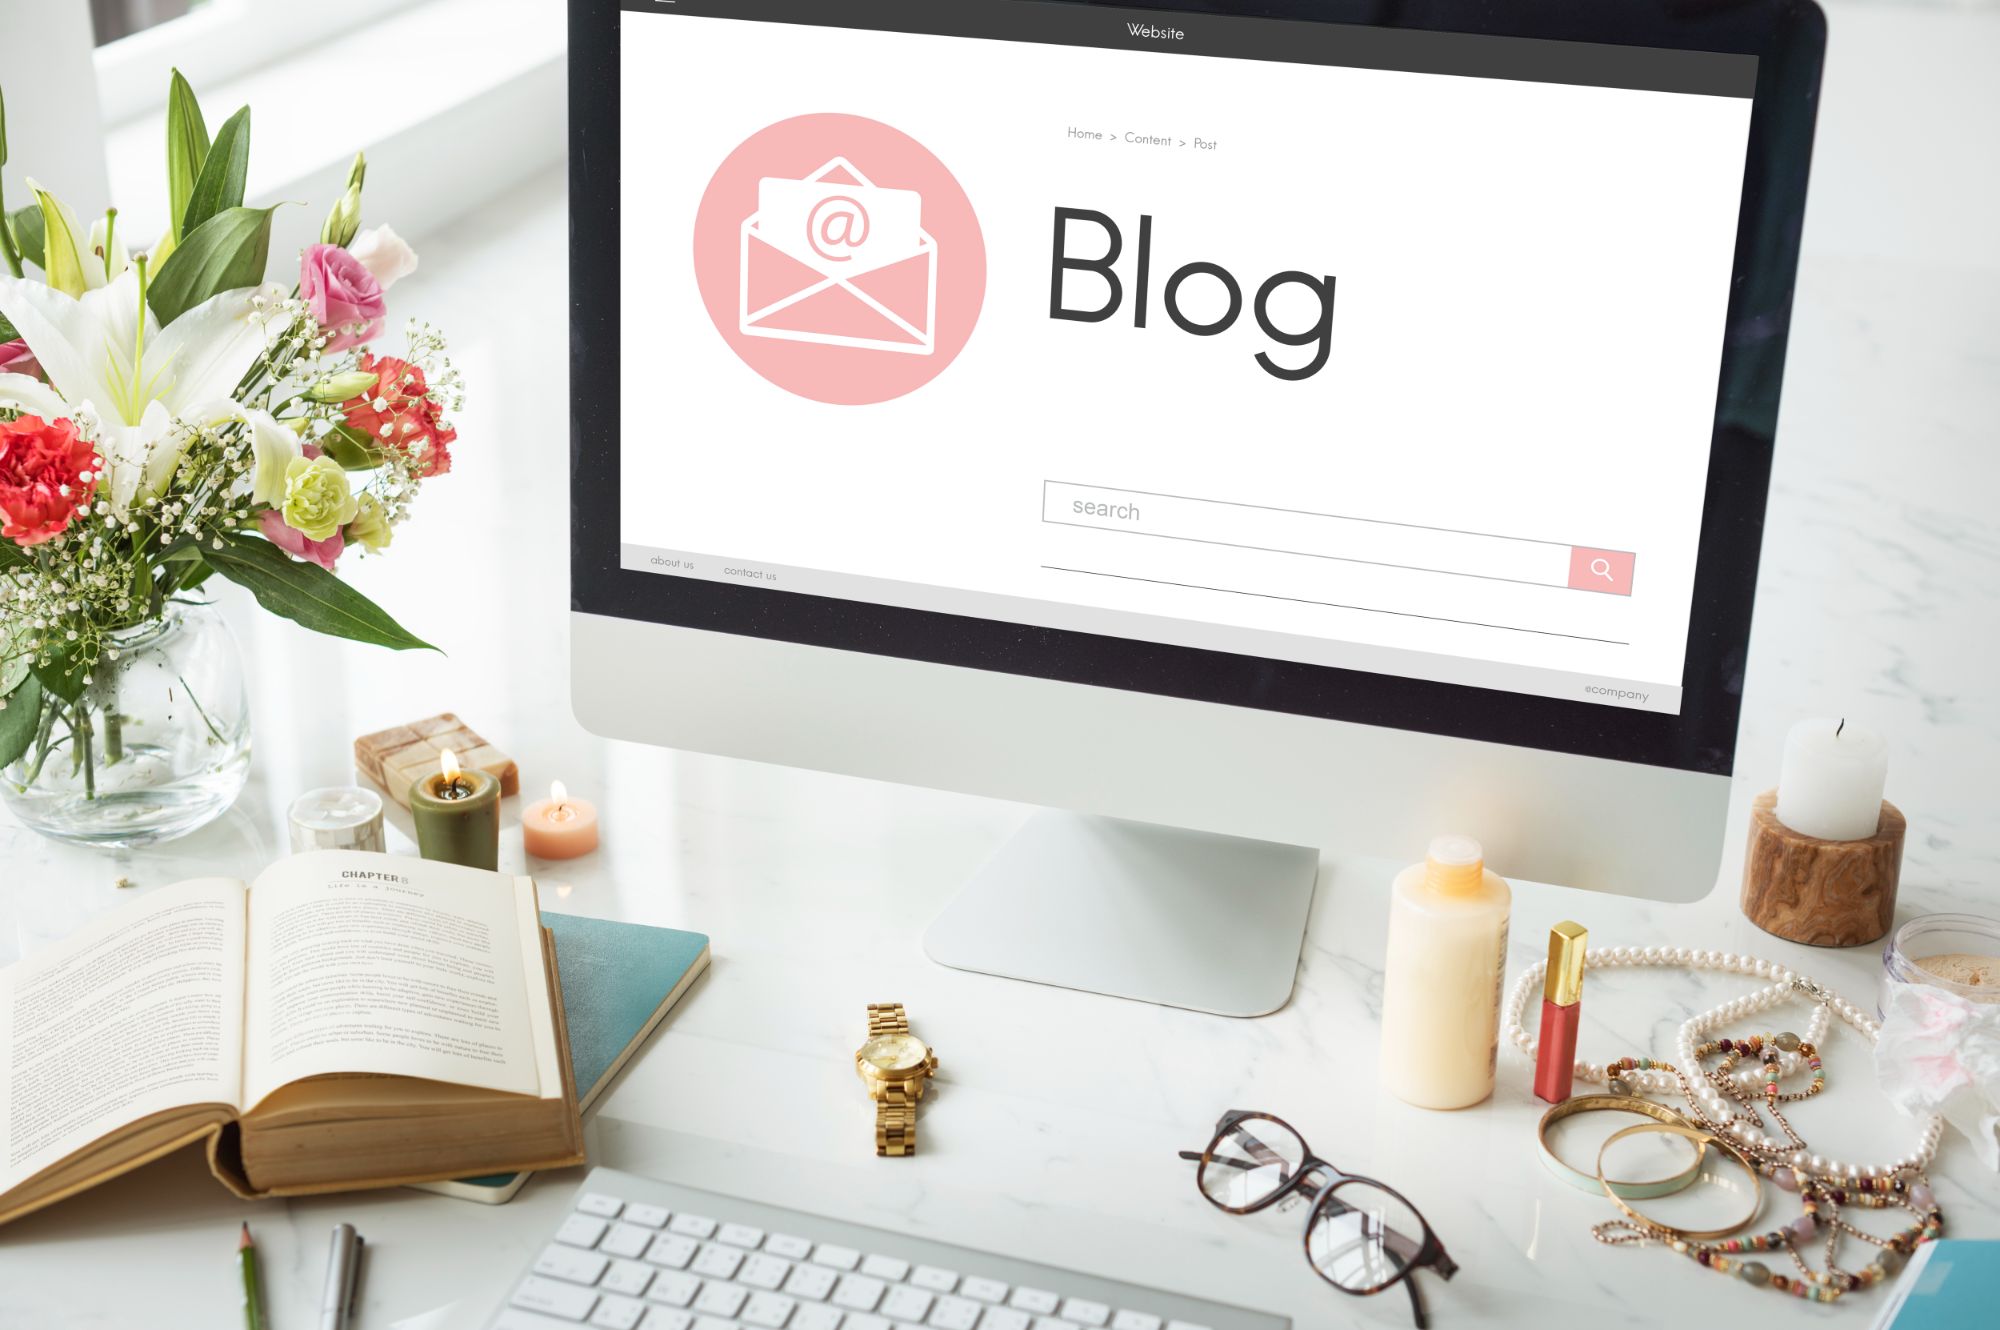 Blog Tools: Work More Efficiently And Effectively To Increase Readership